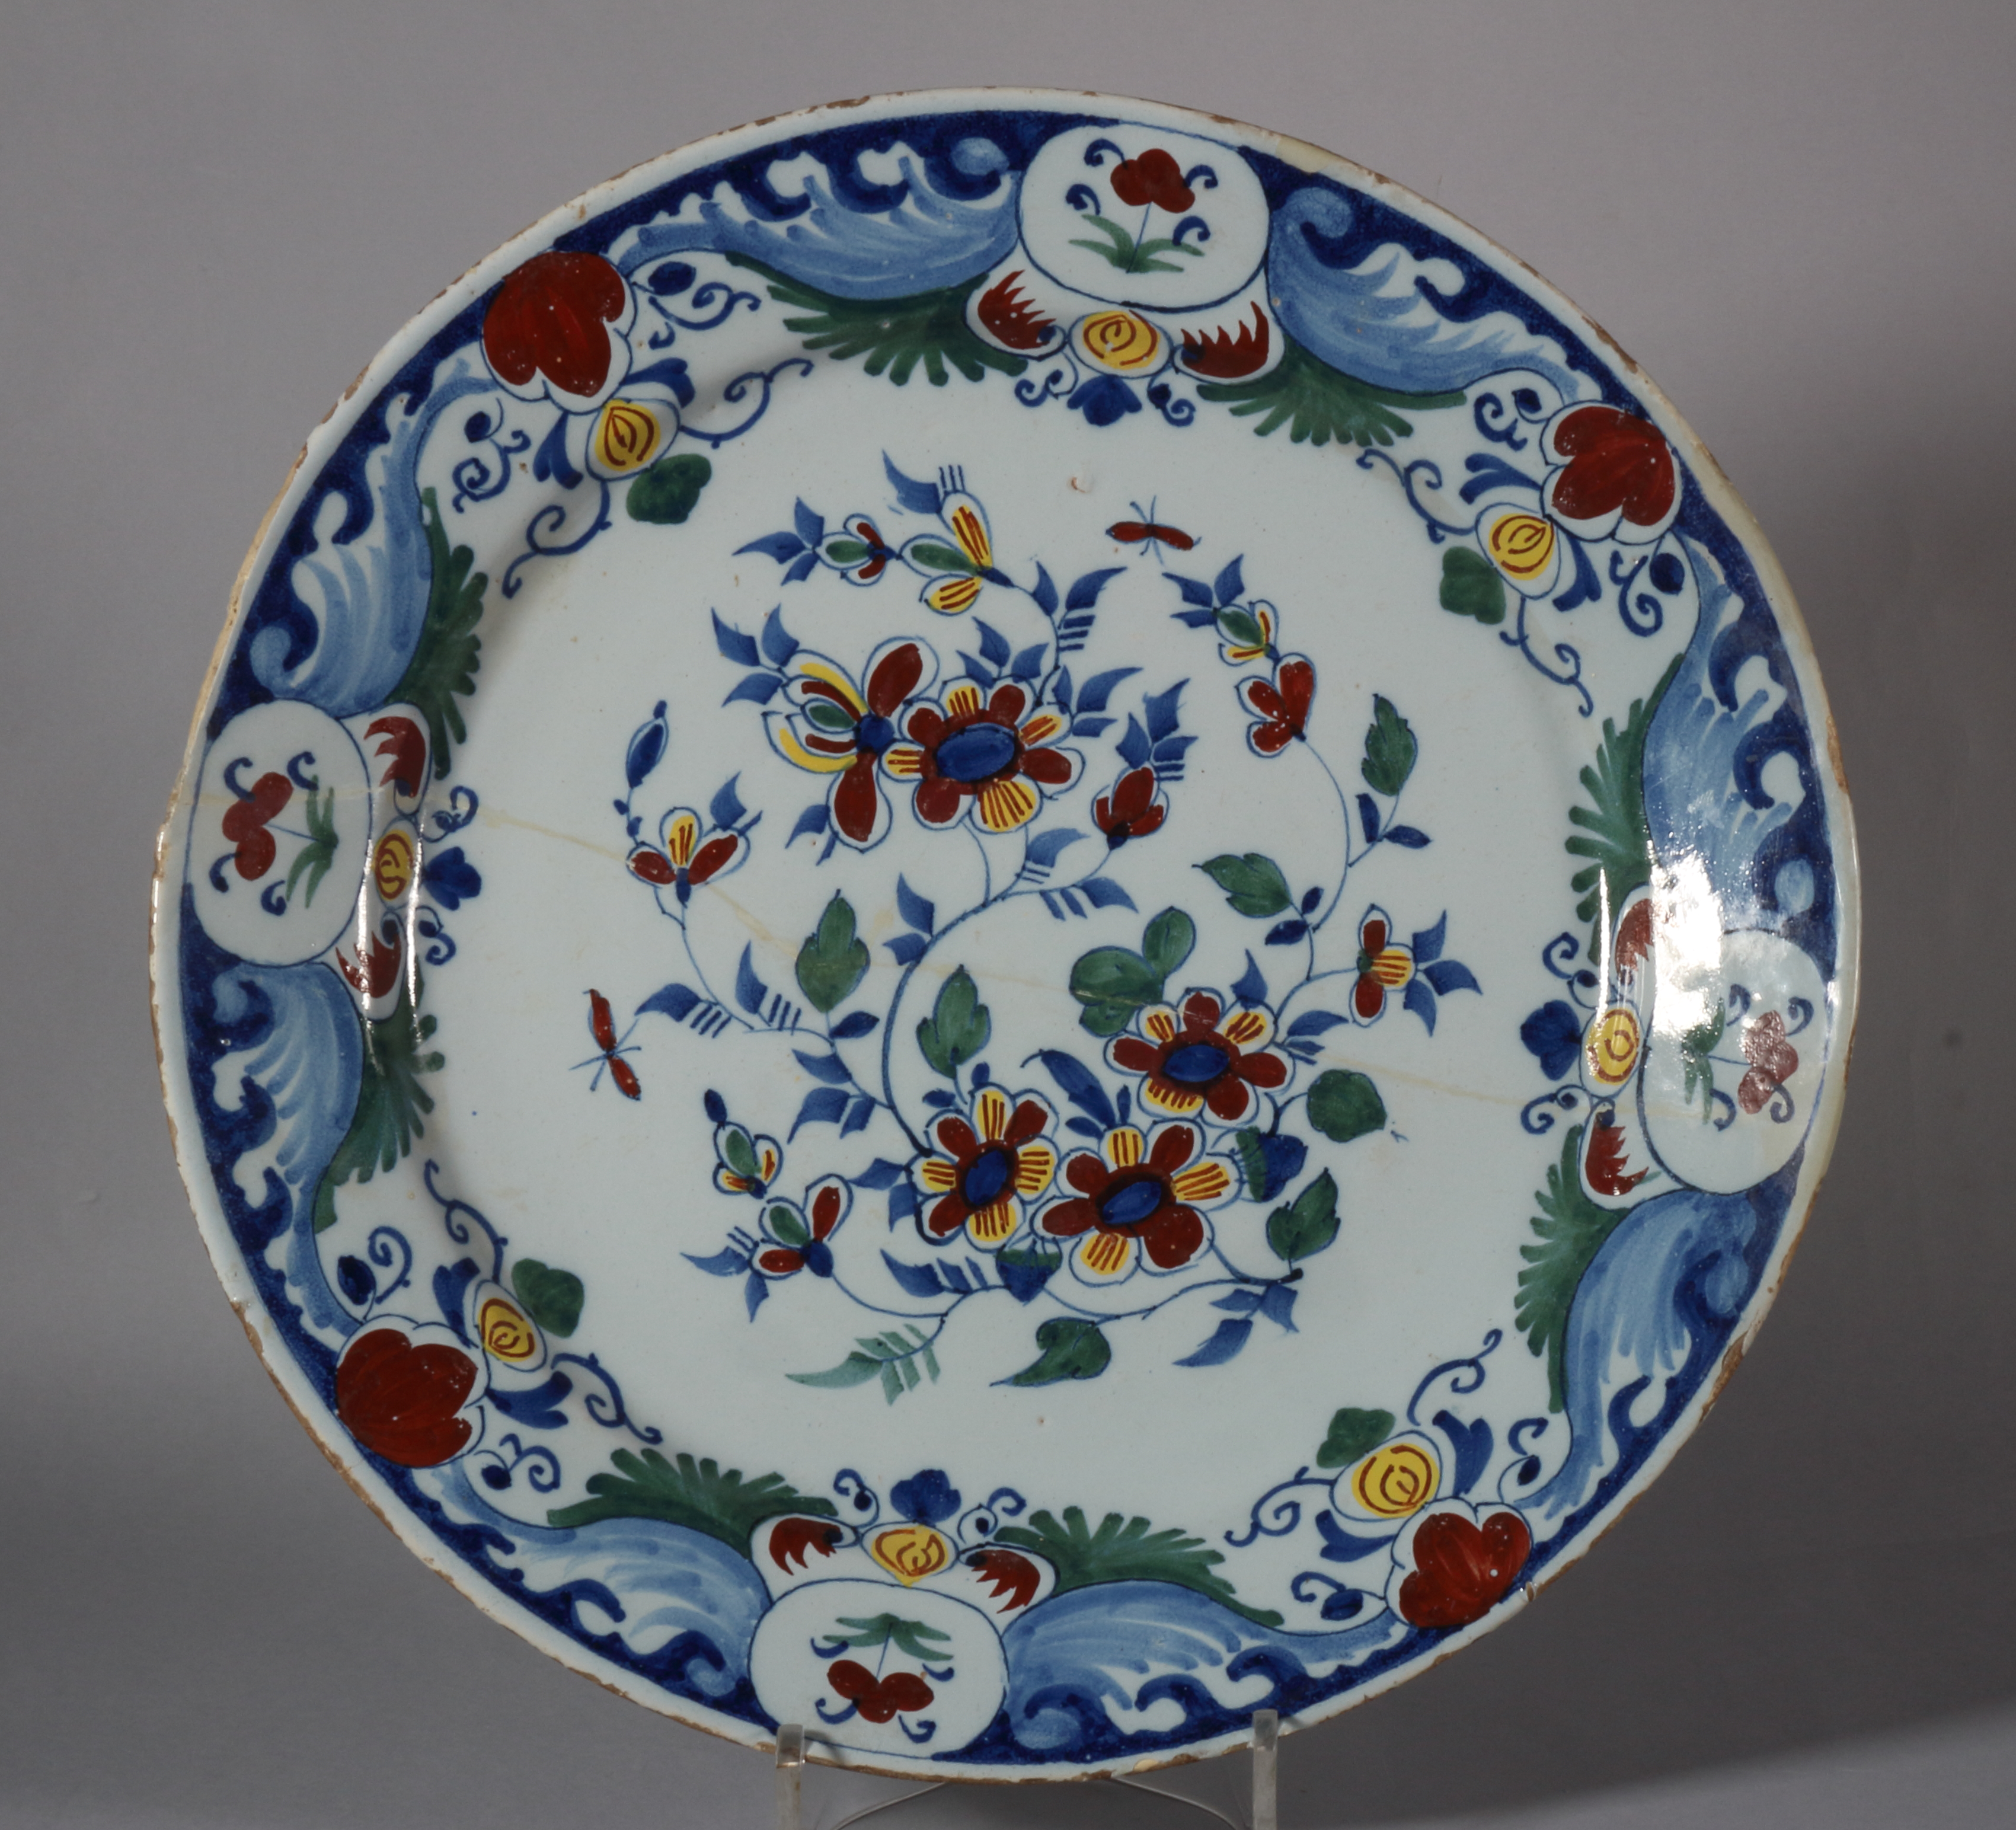 An 18th century Bristol delft charger with spray of flowers and insect decoration, monogram "WP" for